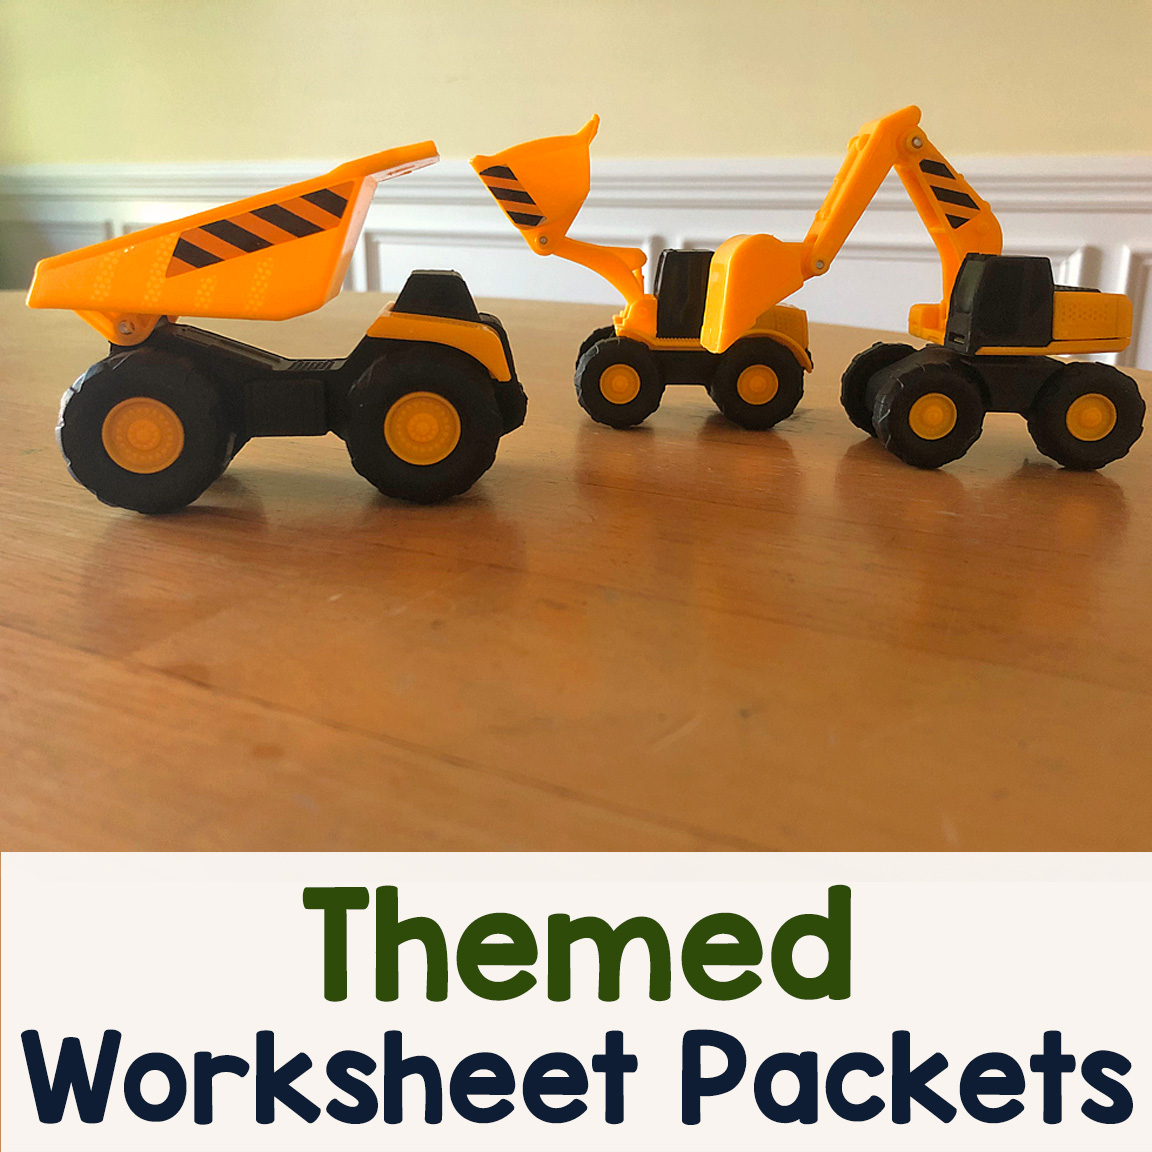 Themed Worksheet Packets